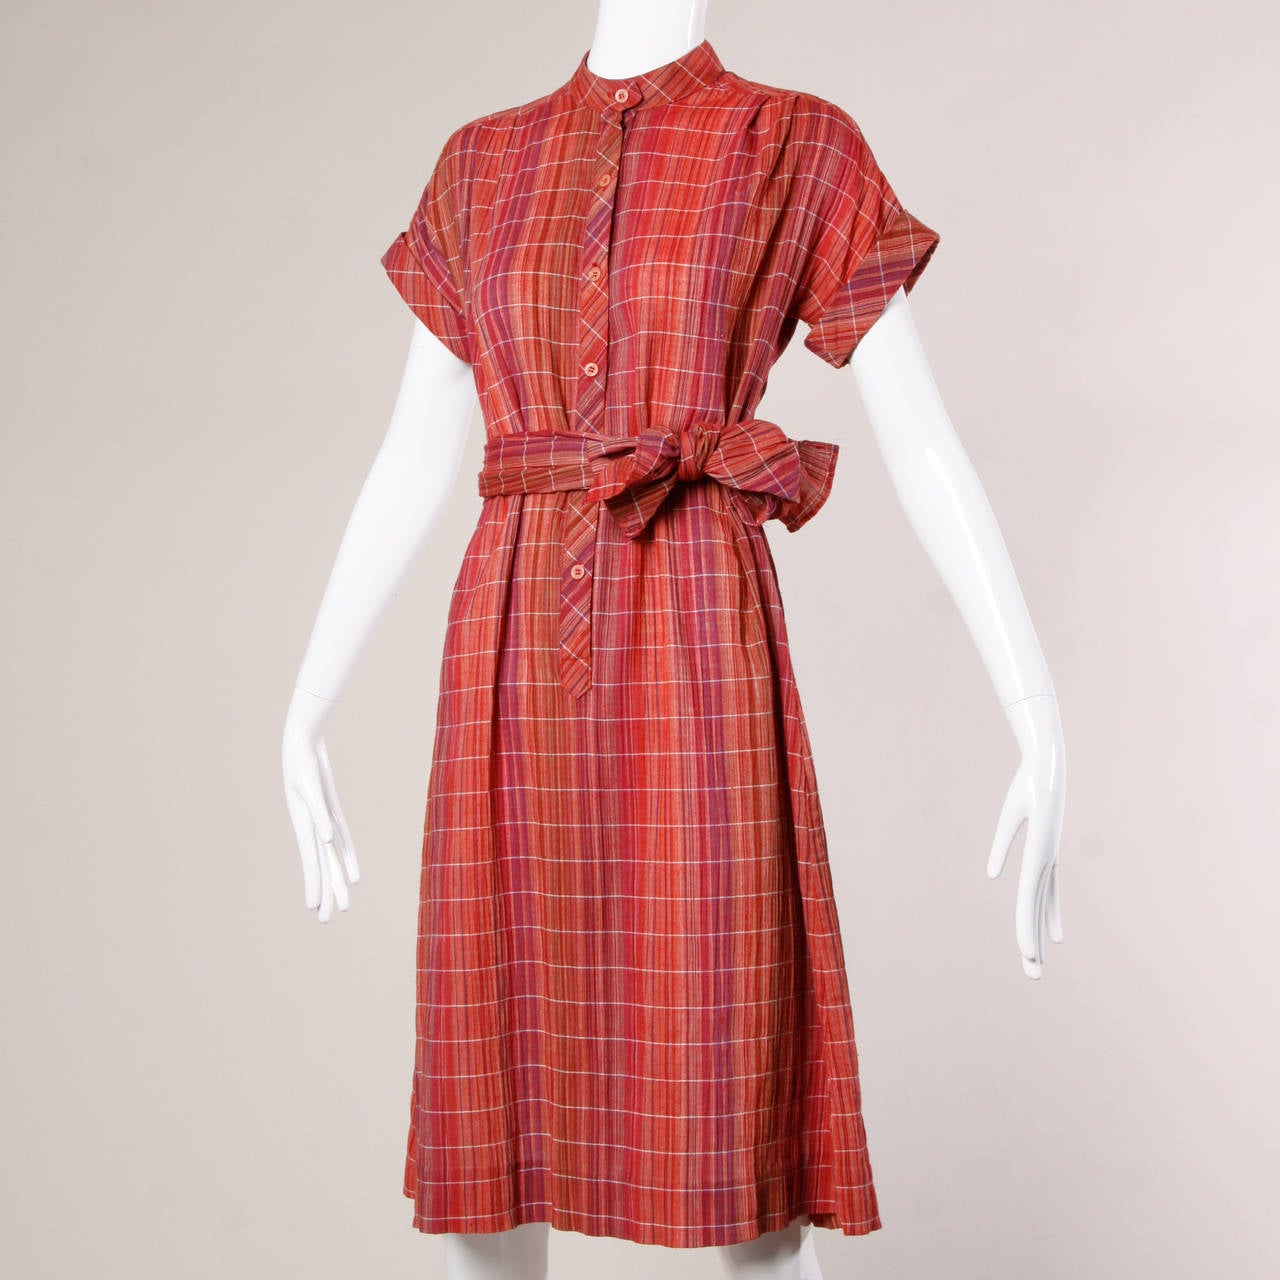 Vintage Pierre Balmain plaid dress and sash ensemble that can be worn different ways. Rare label from the 70s!

Details:

Unlined
Matching Sash
Front Button Closure
Marked Size: 10
Estimated Size: Medium
Color: Magenta/ Blood Red/